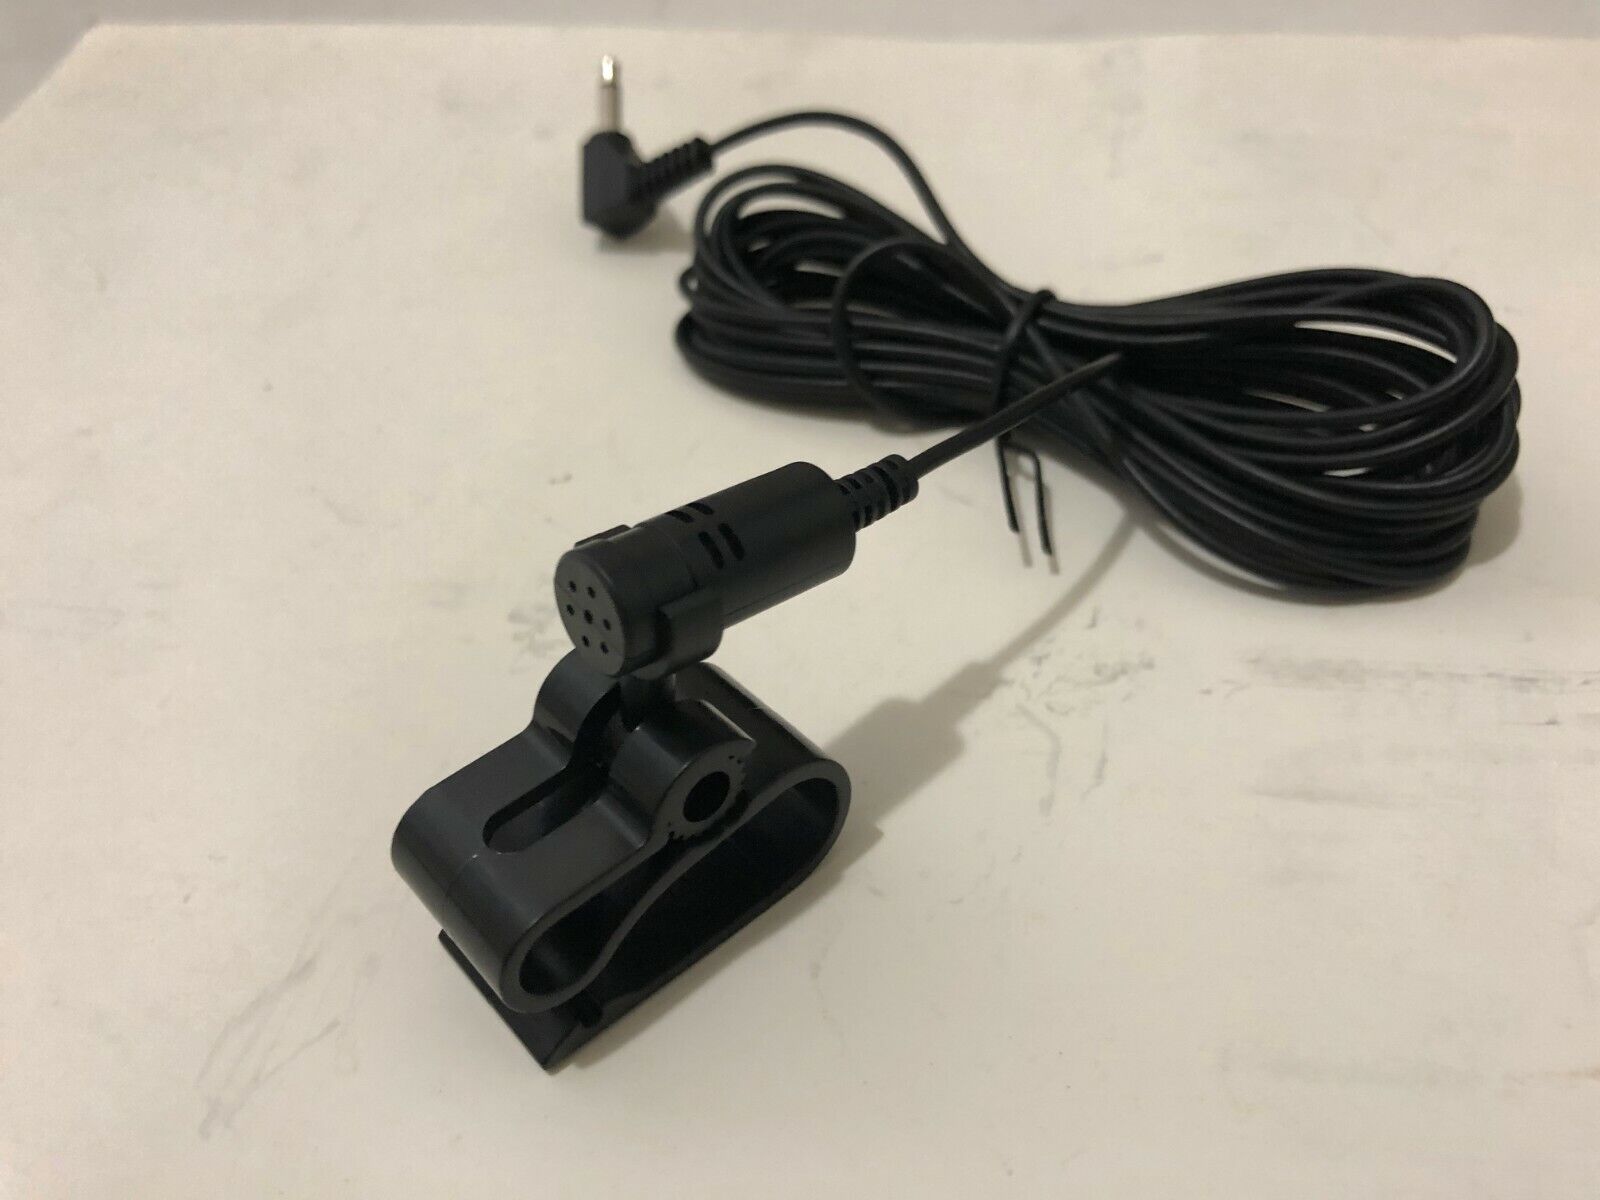 COLOR REAR VIEW CAMERA W// QUICK CONNECT FOR JVC KW-V250BT KWV250BT